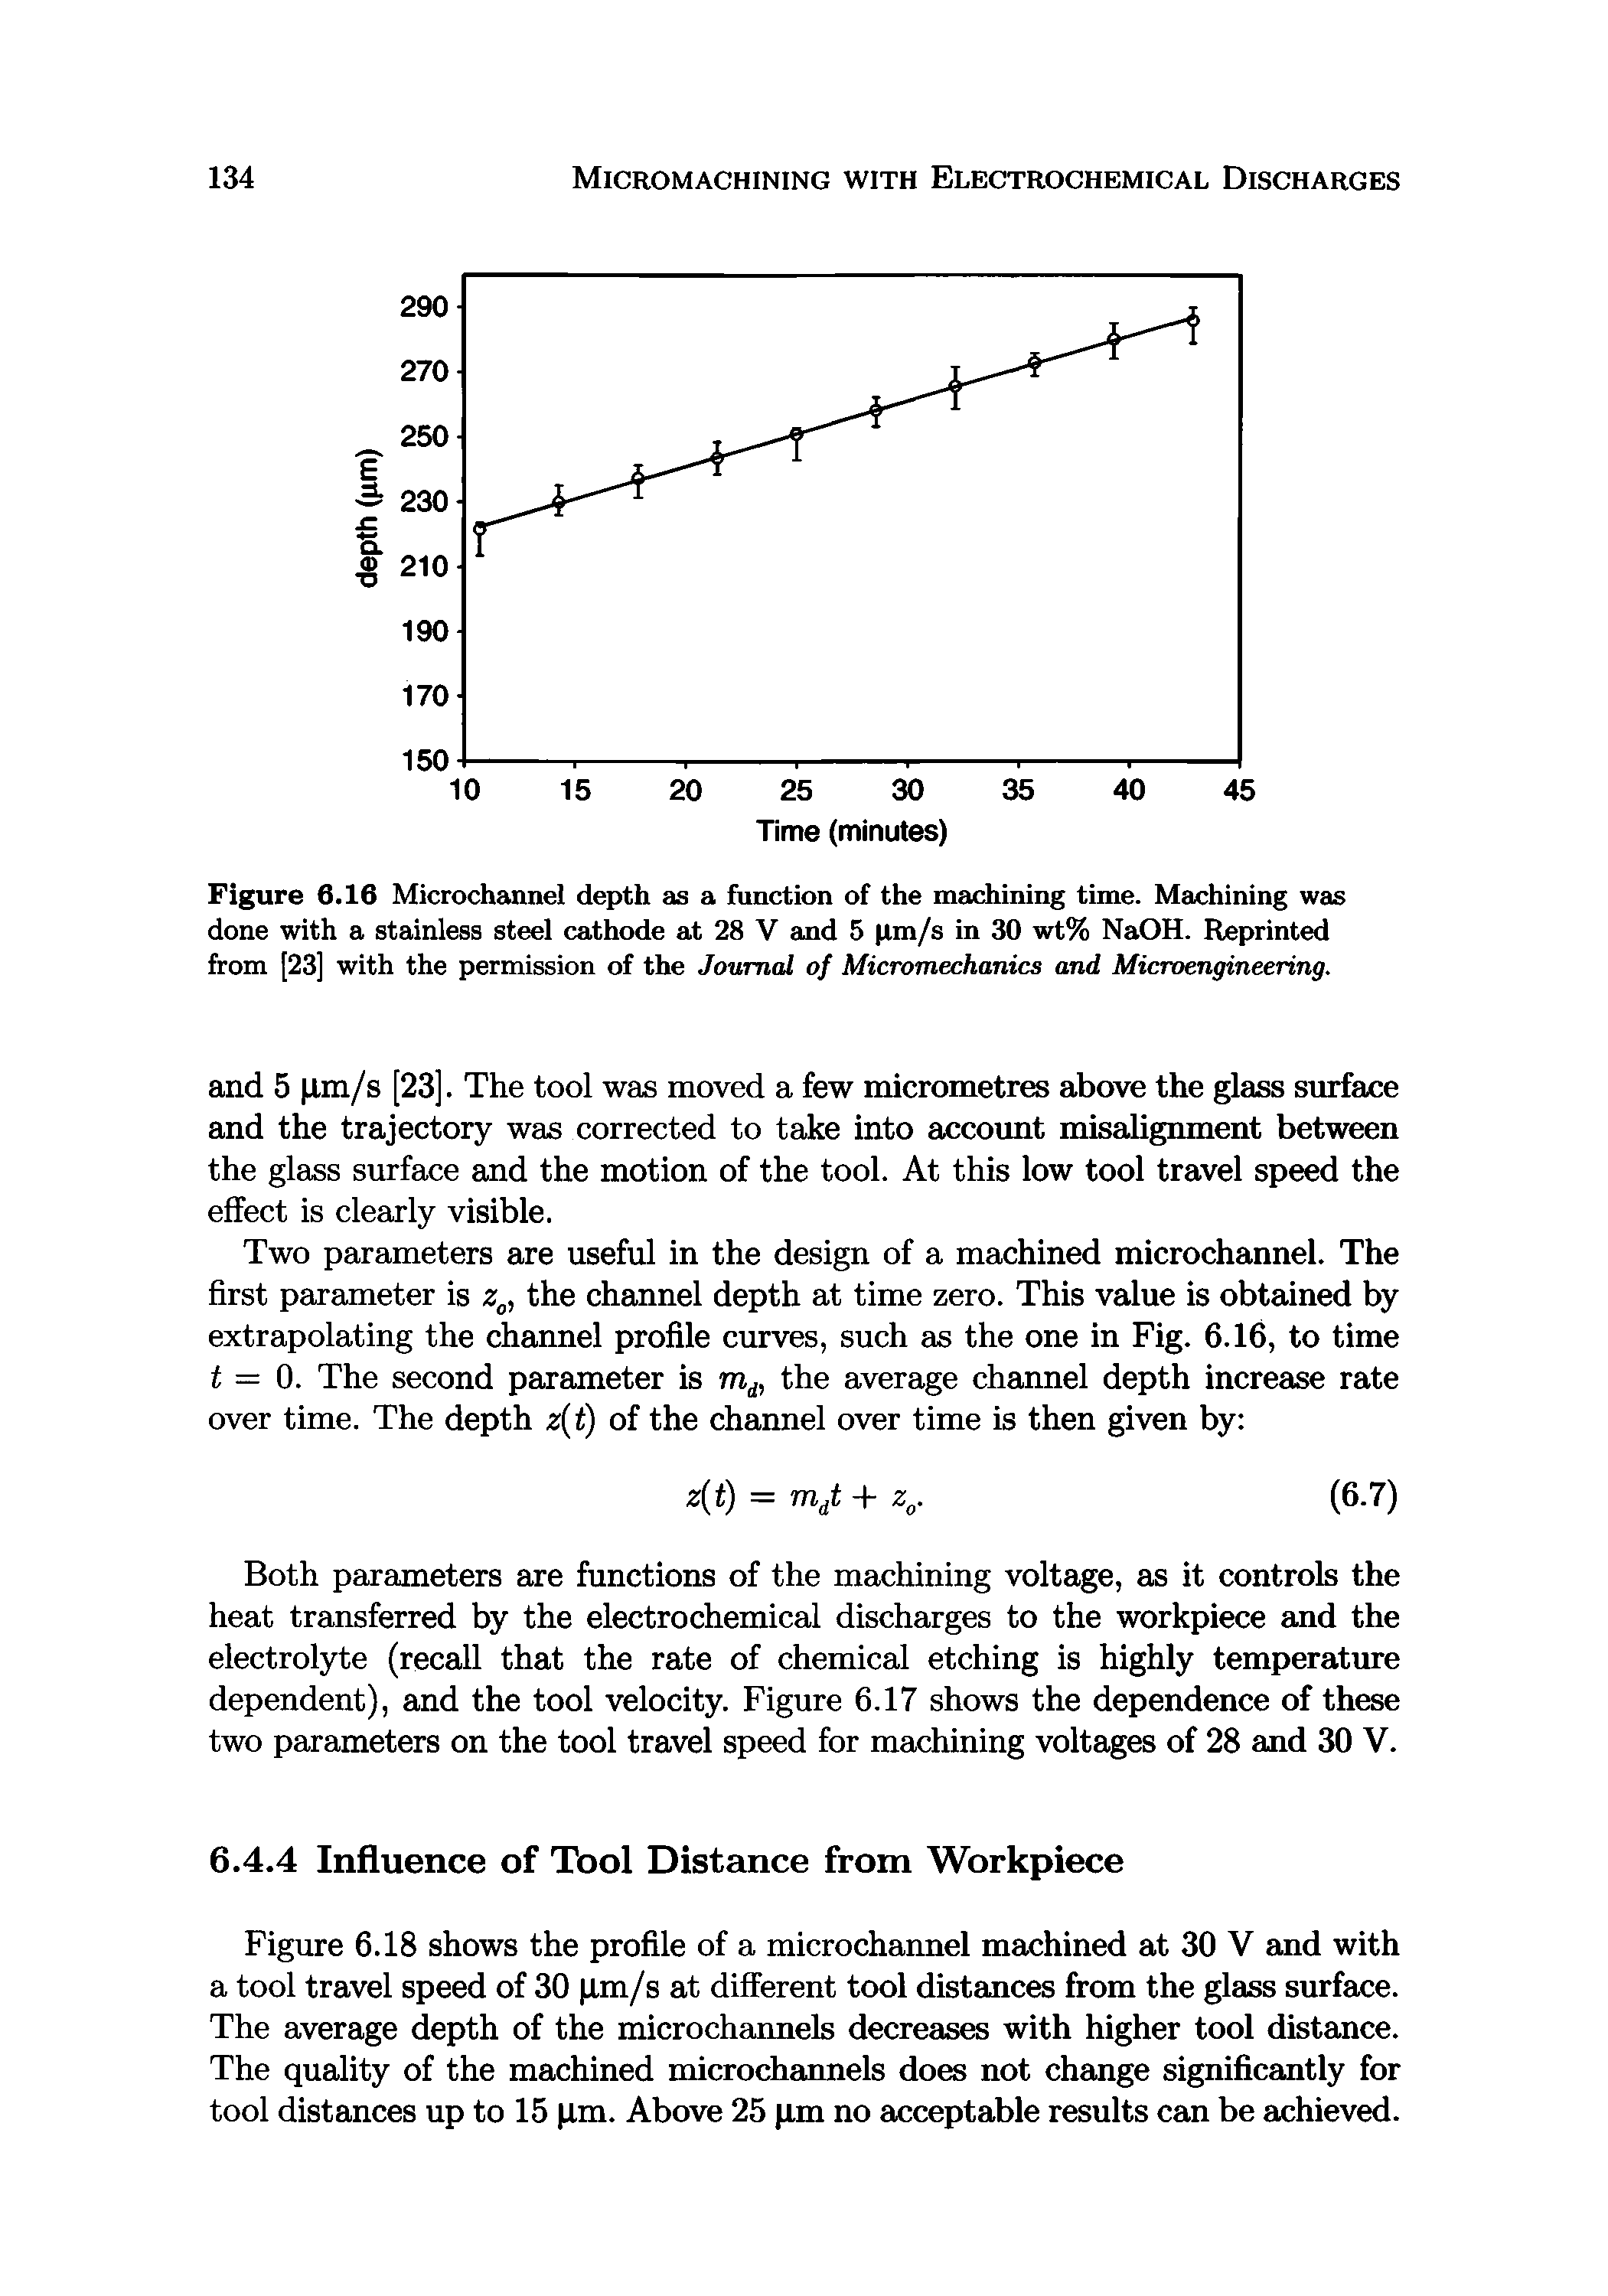 Figure 6.16 MicroChannel depth as a function of the machining time. Machining was done with a stainless steel cathode at 28 V and 5 lm/s in 30 wt% NaOH. Reprinted from [23] with the permission of the Journal of Micromechanics and Microengineering.